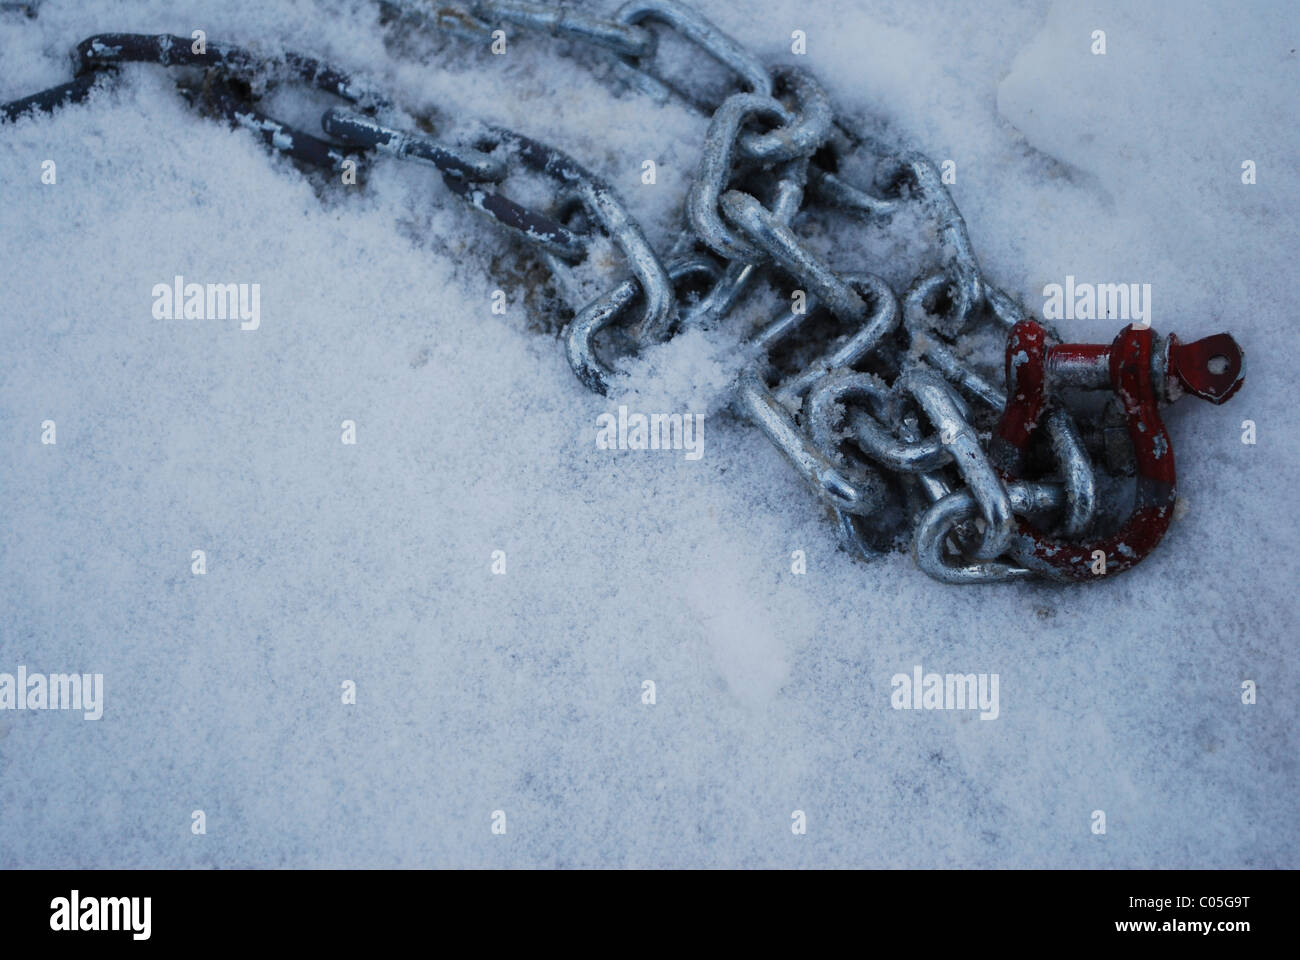 A chain lies in the snow Stock Photo